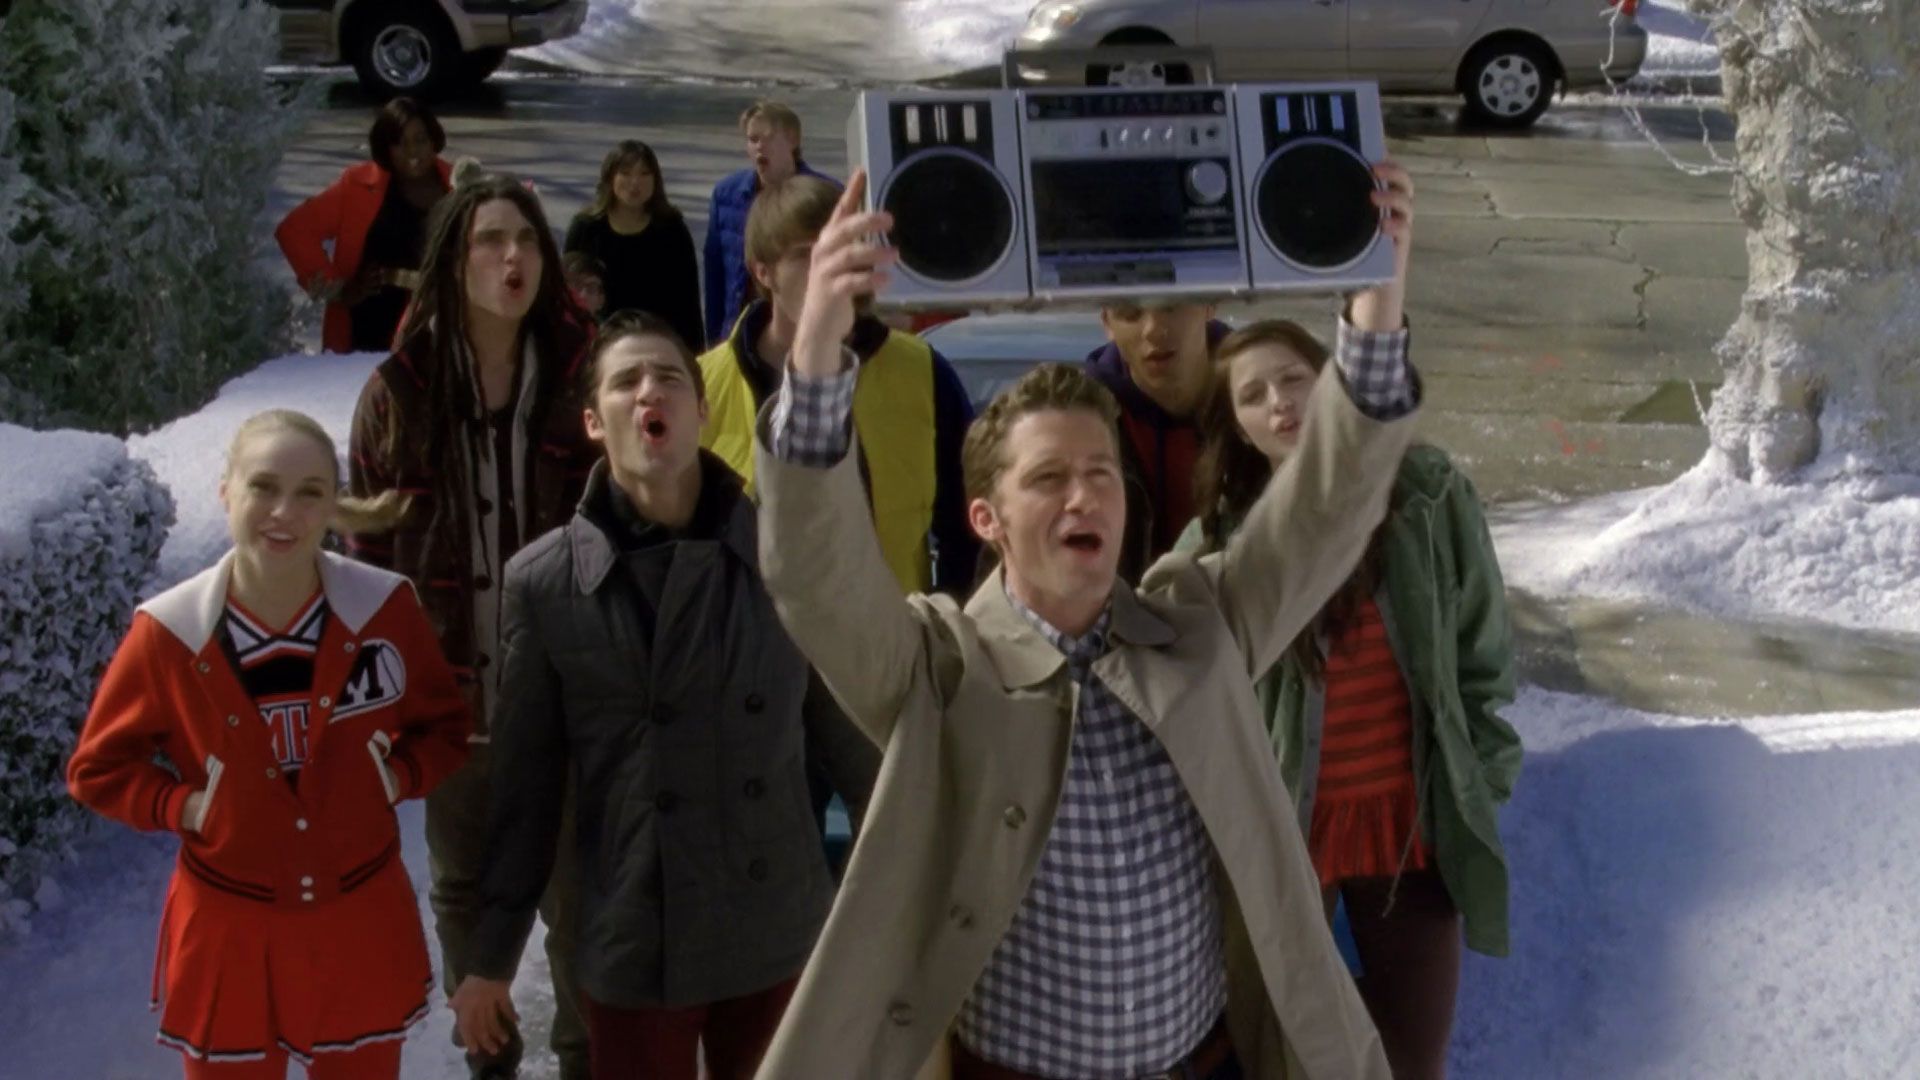 song in say anything boombox scene